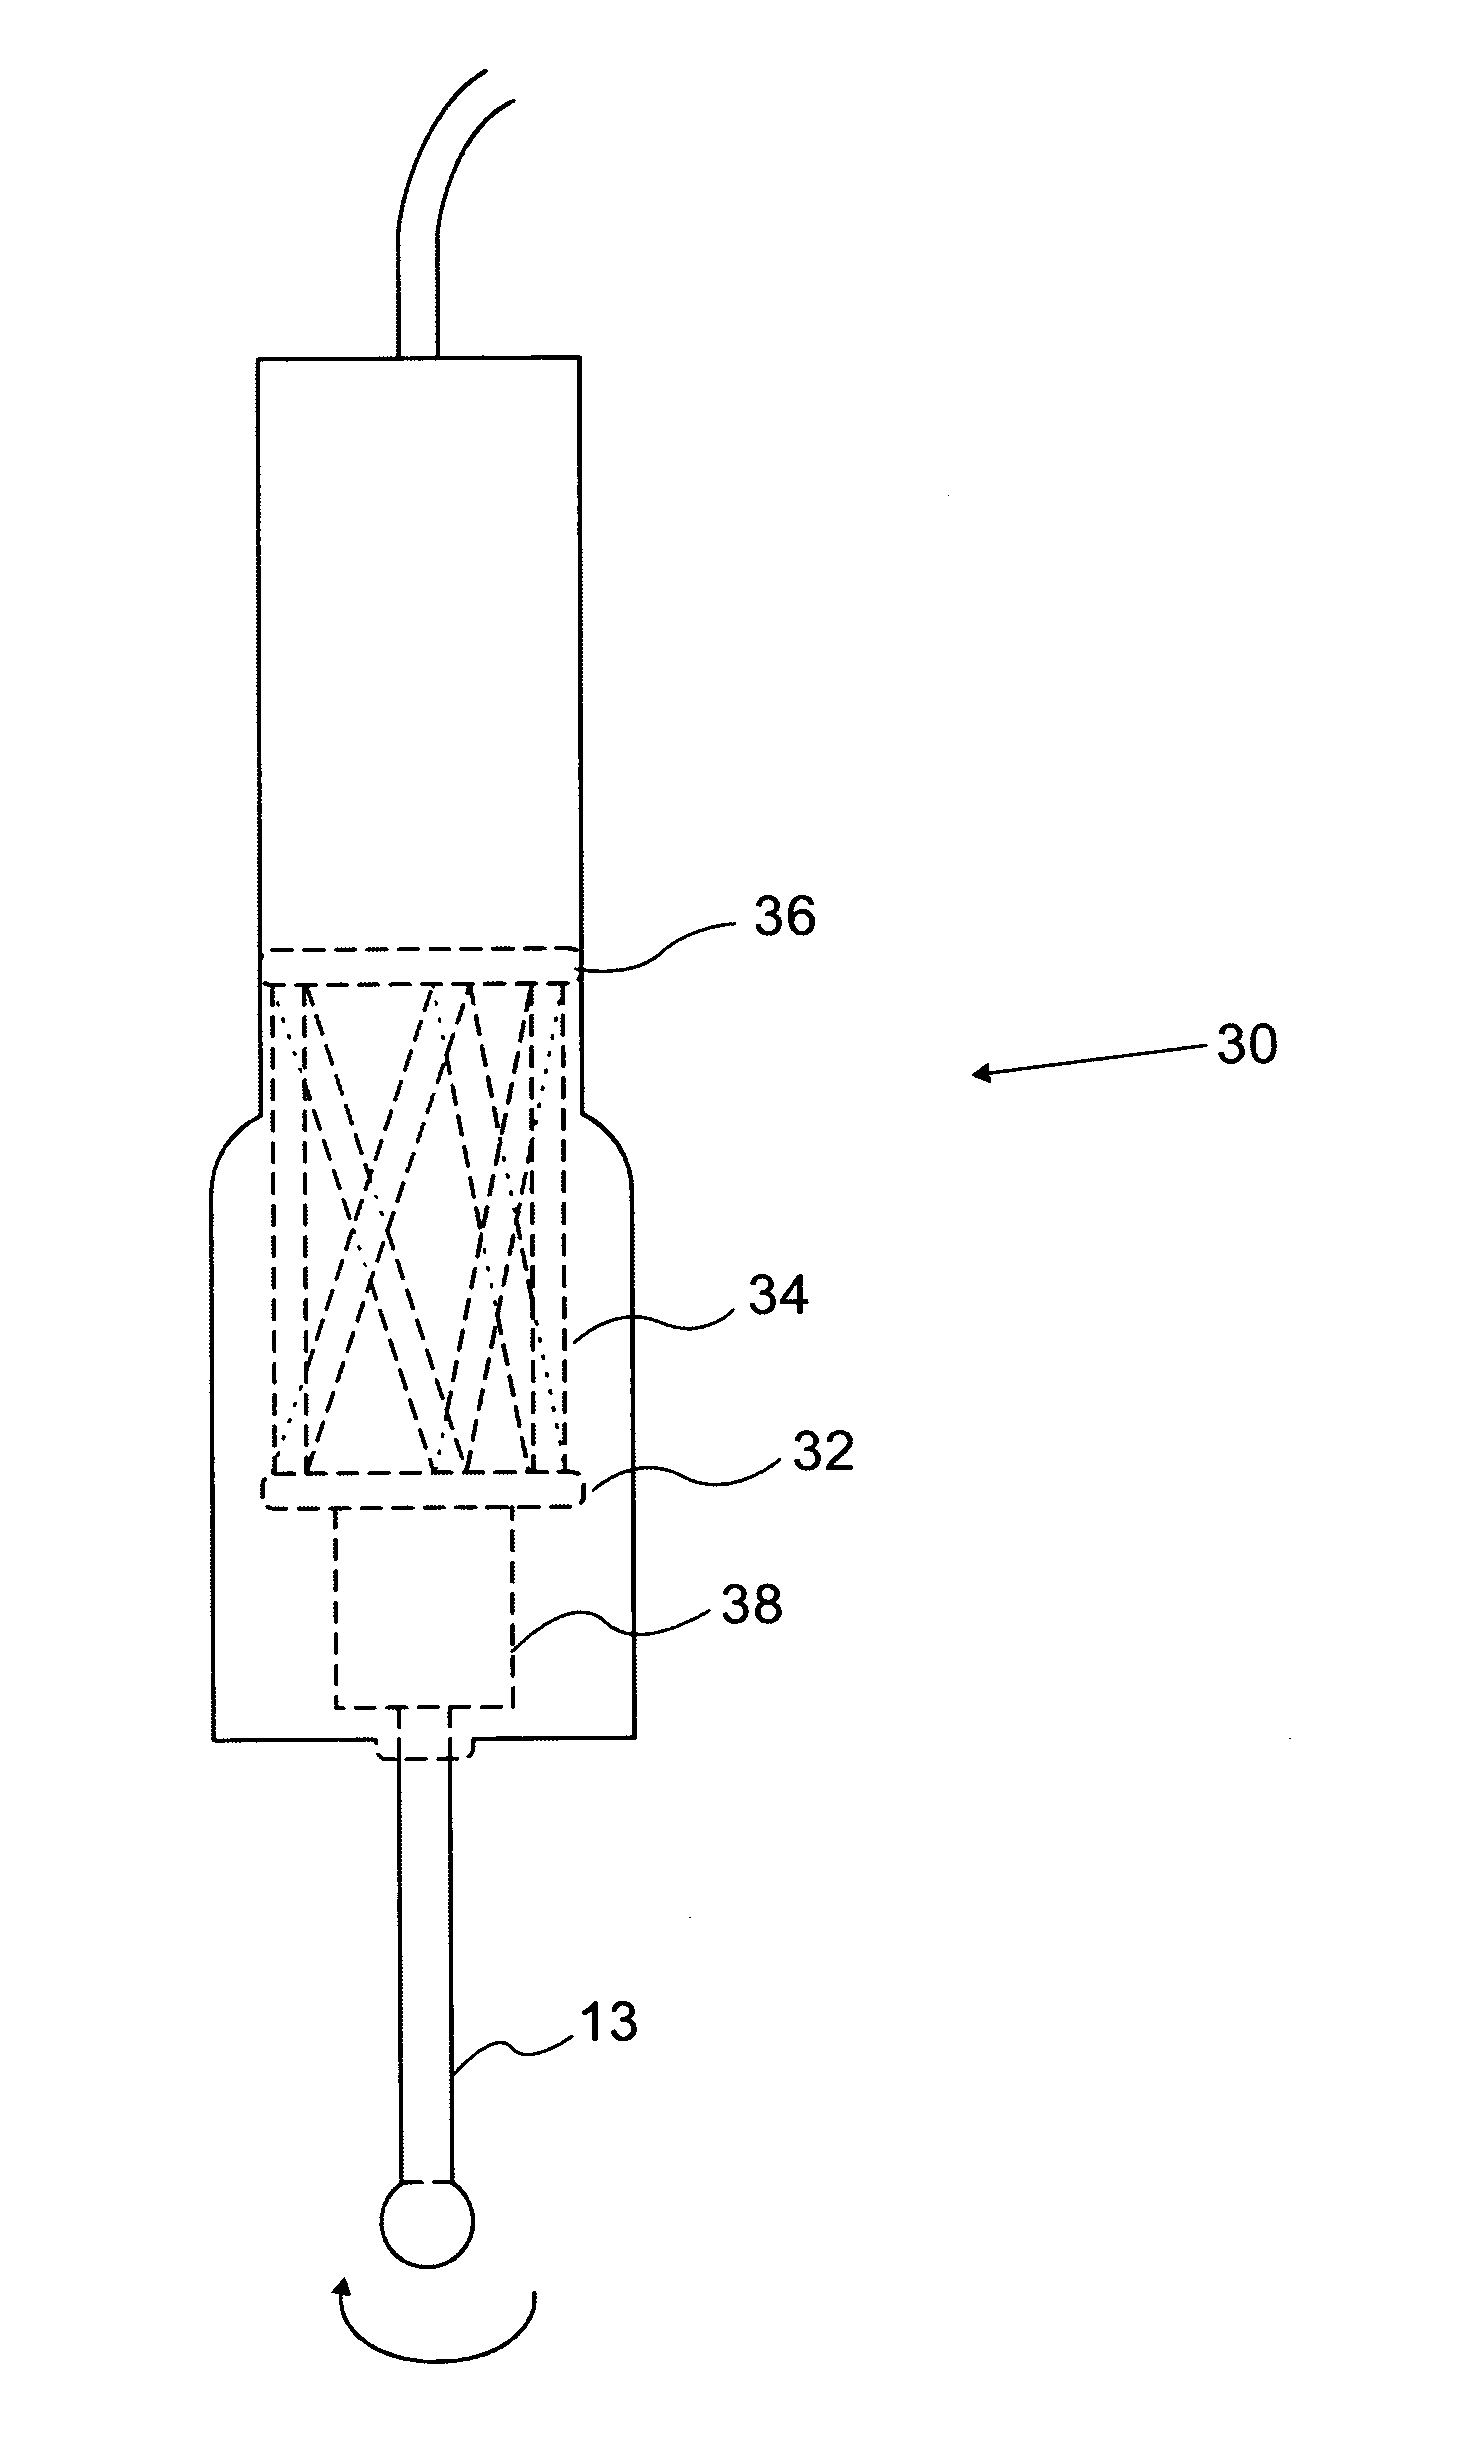 Device for improving the accuracy of manual operations